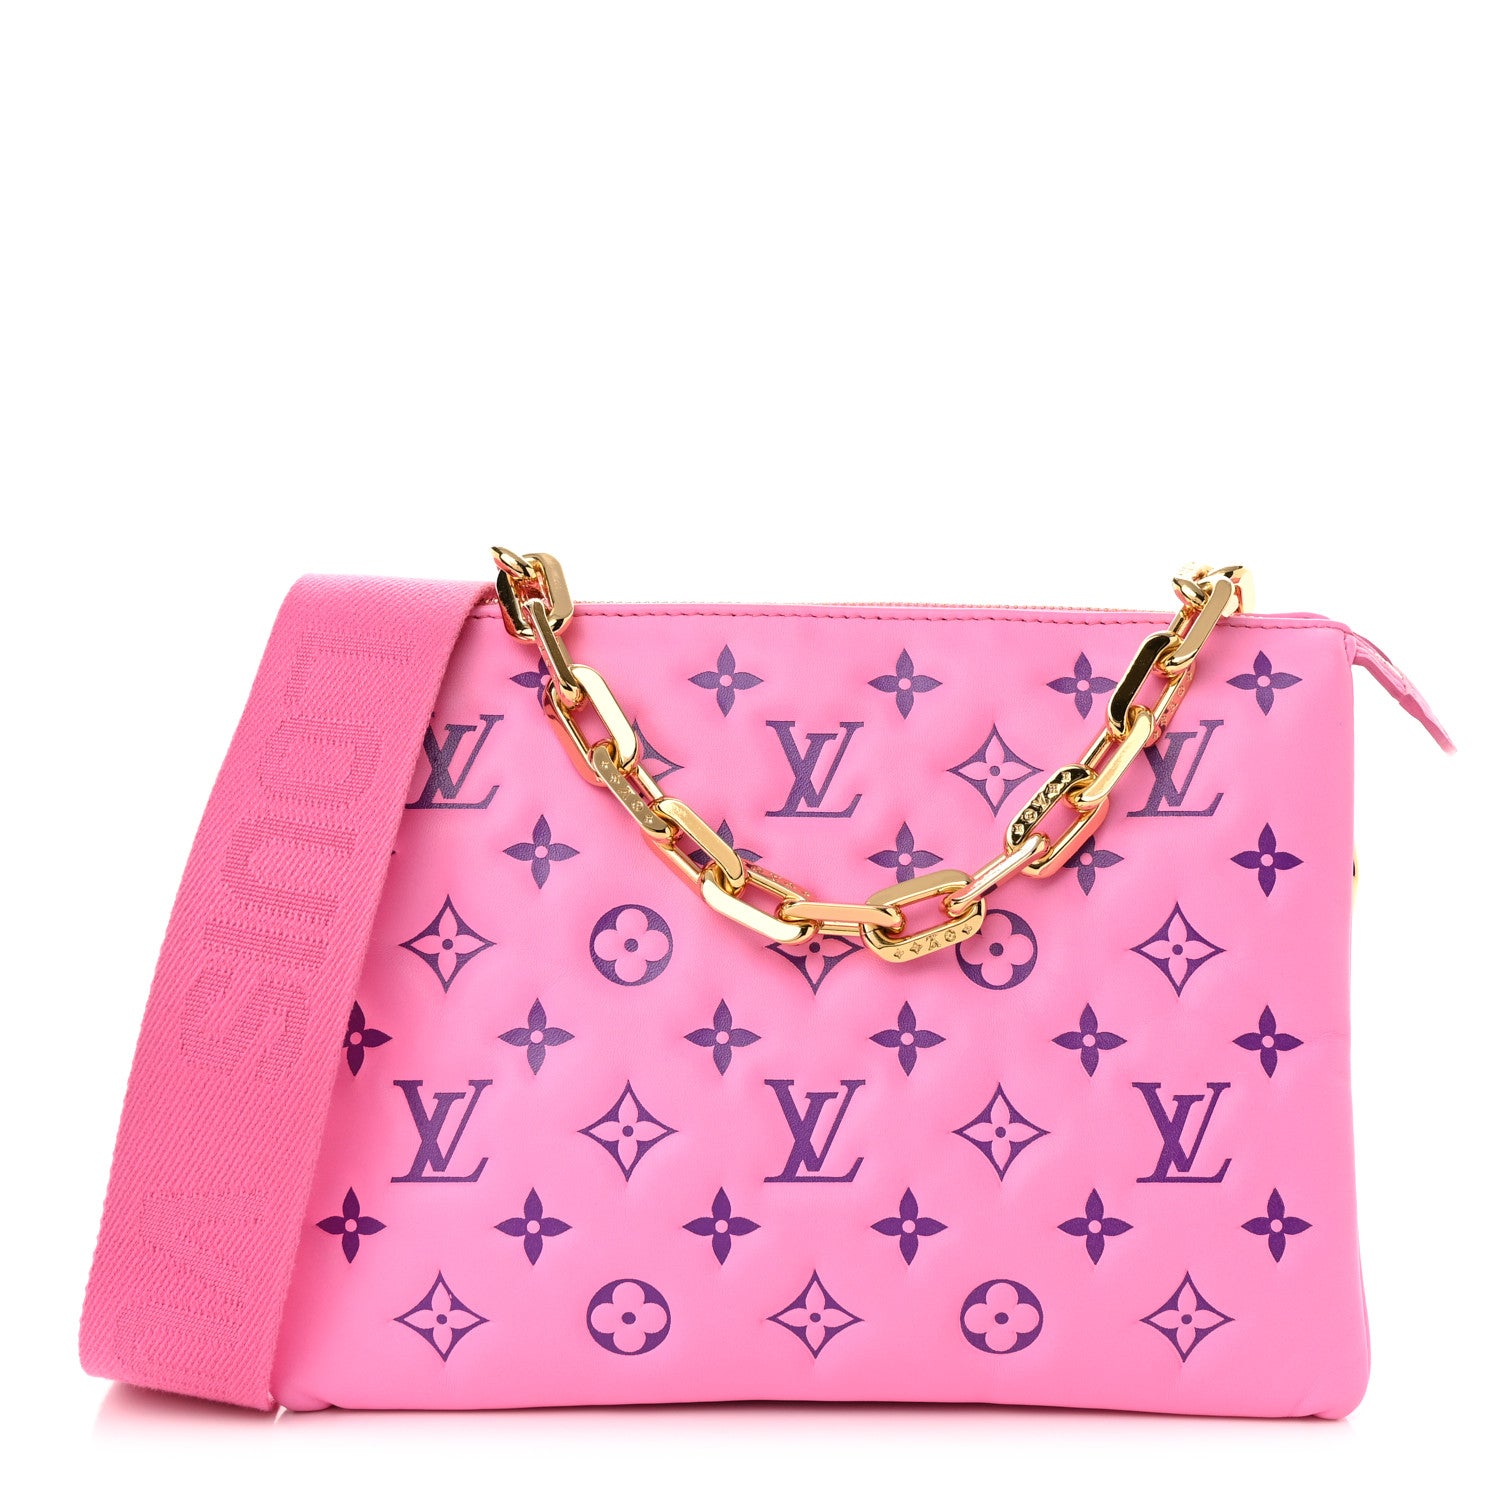 Most Expensive Louis Vuitton Bags coussin lambskin bag